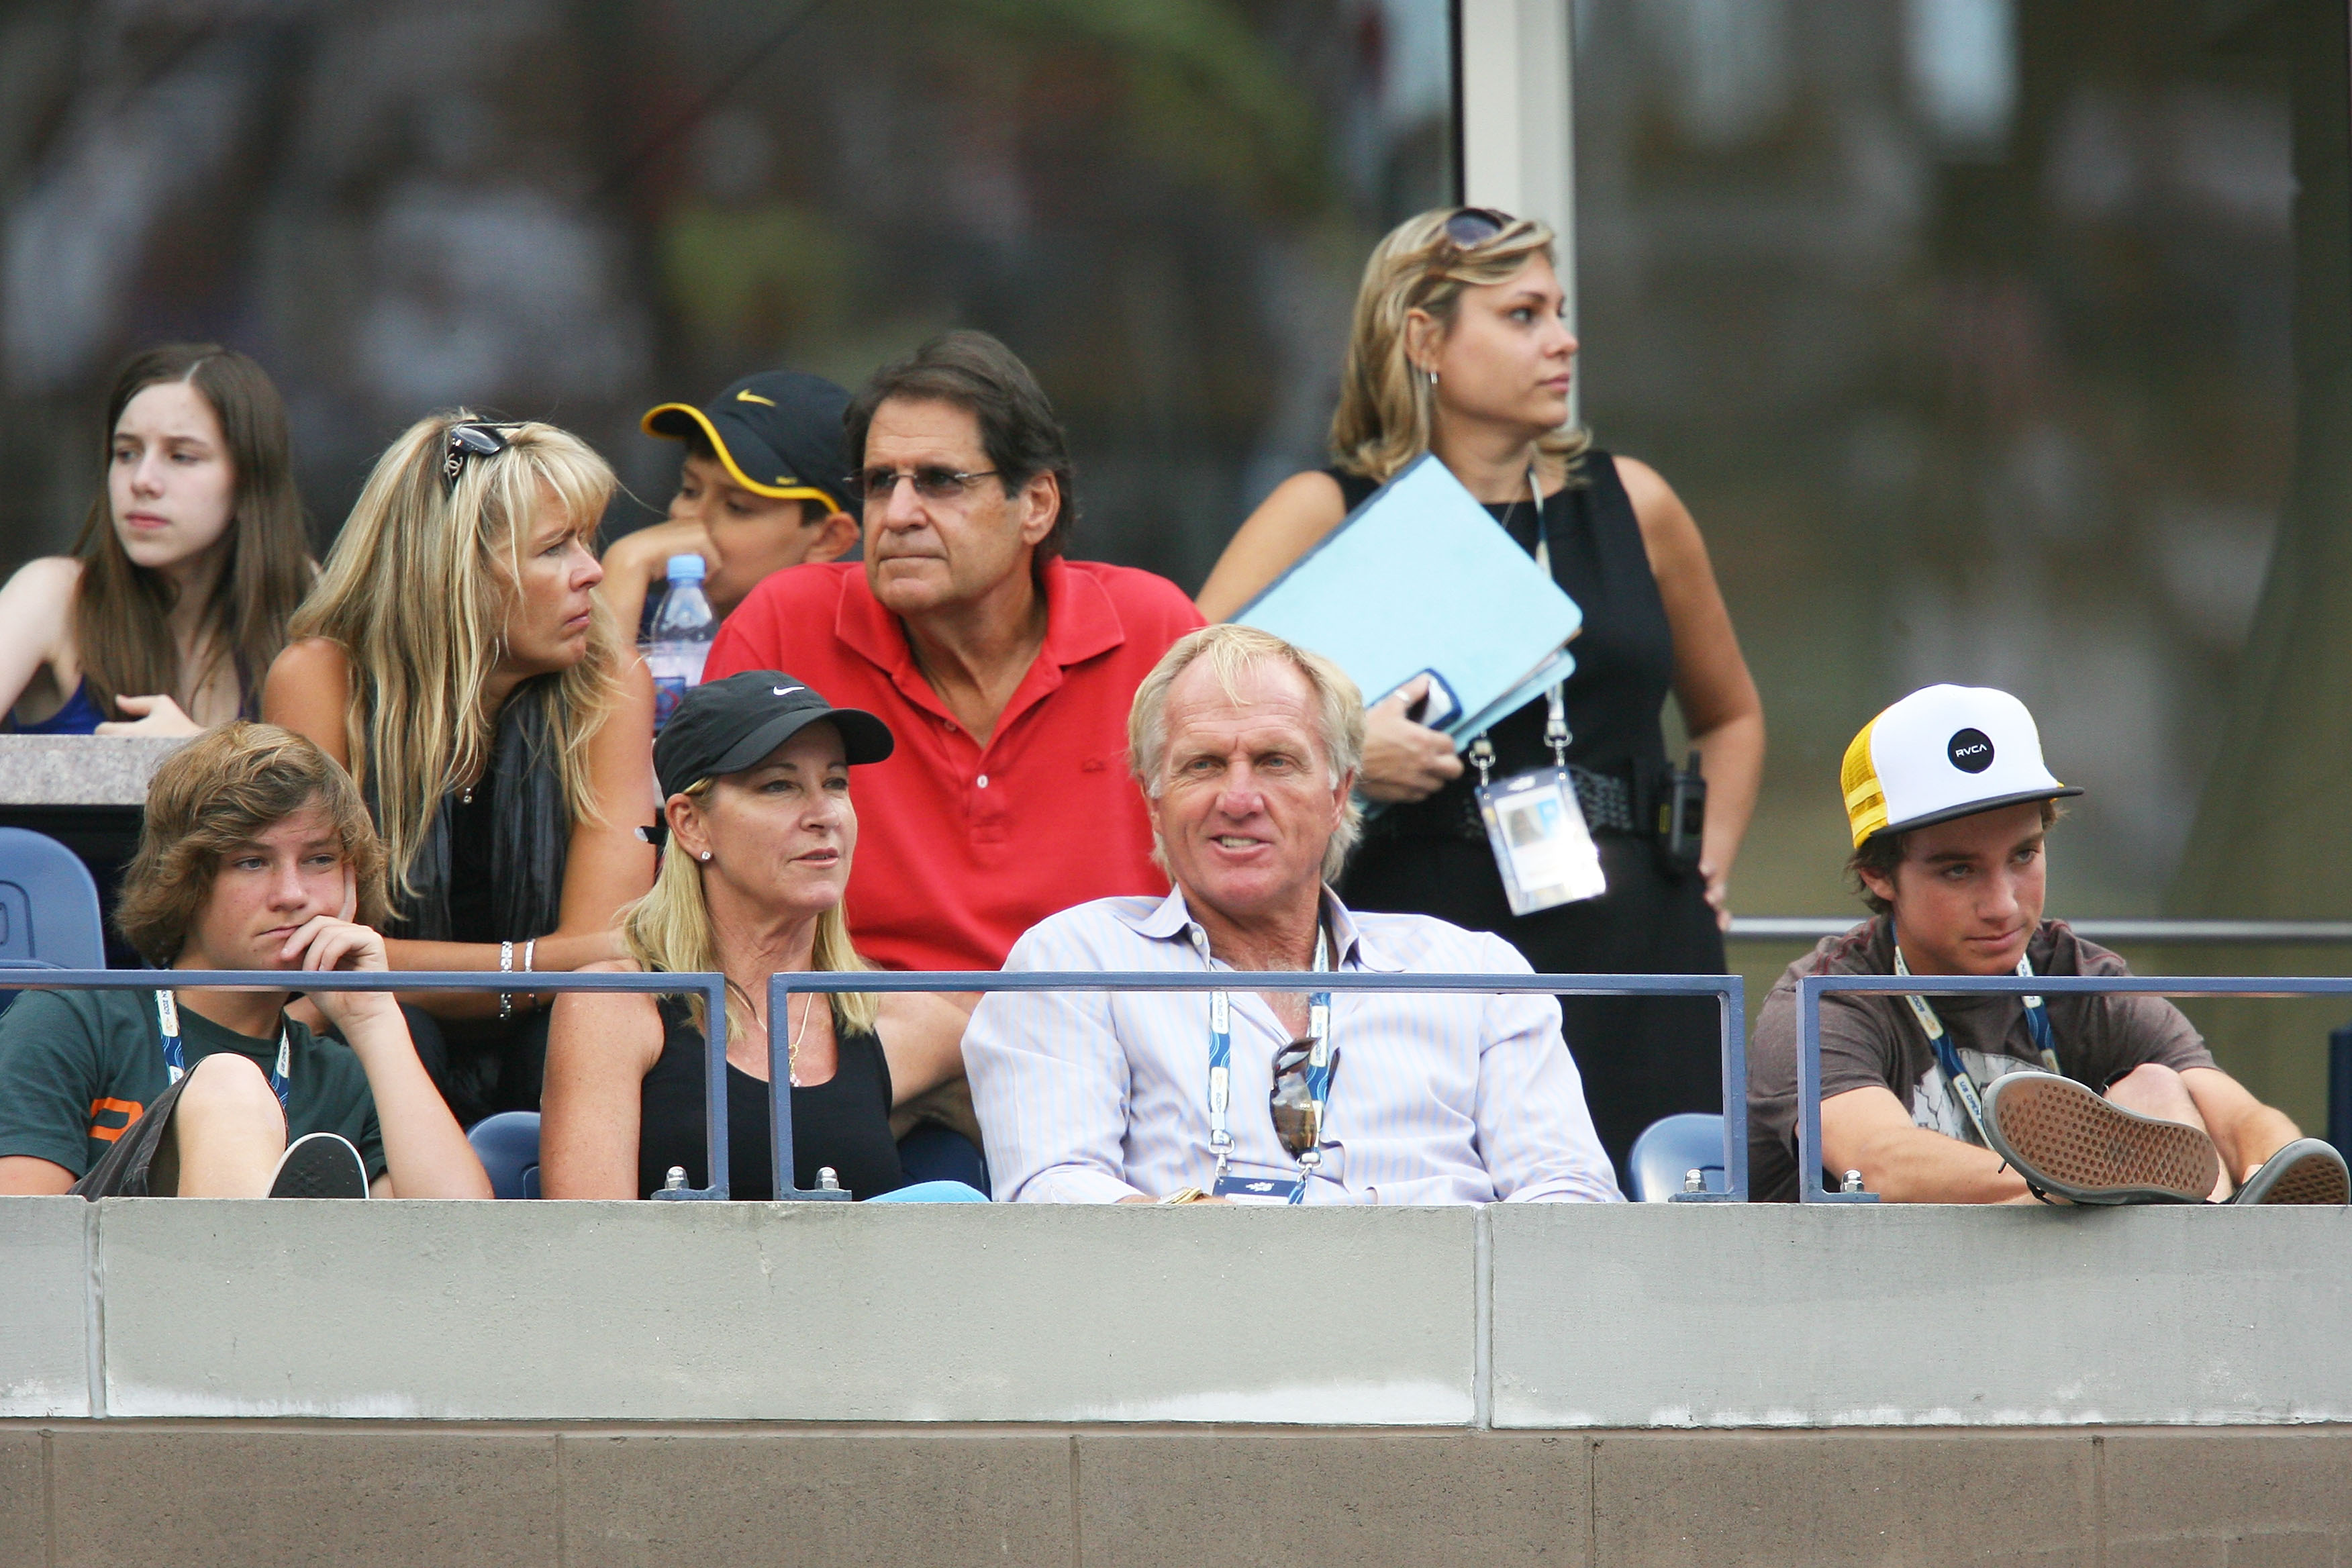 Greg Norman’s Divorce From Chris Evert After Just 18 Months of Marriage Proves He Learned a $102 Million Lesson